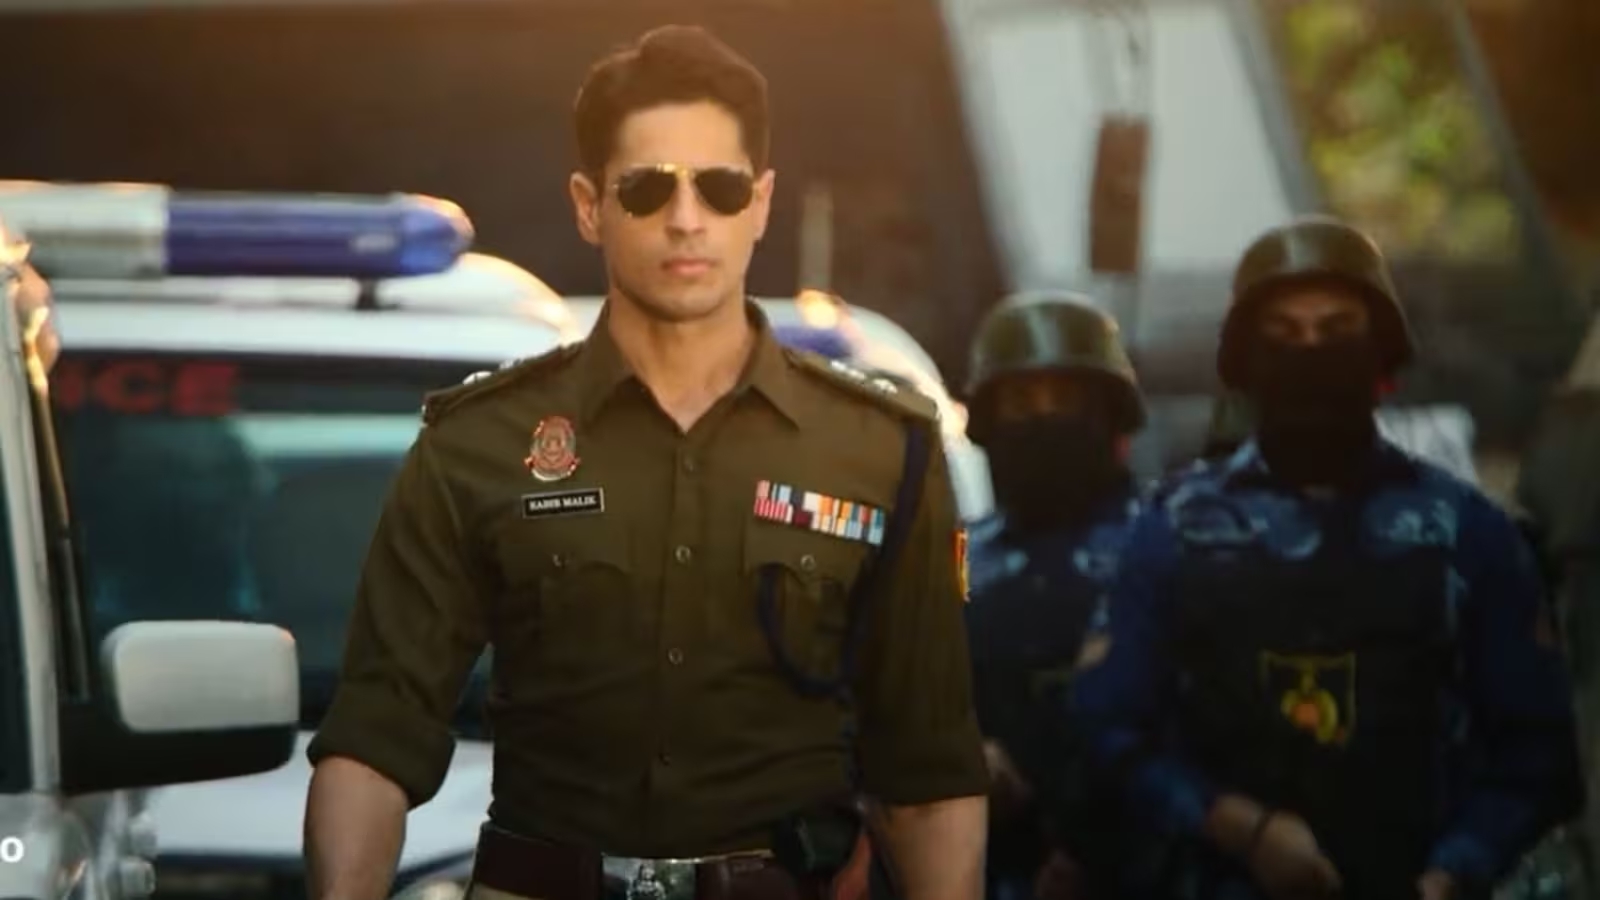 "Sidharth Malhotra Feels Honored to Play a Cop in 'Indian Police Force'"